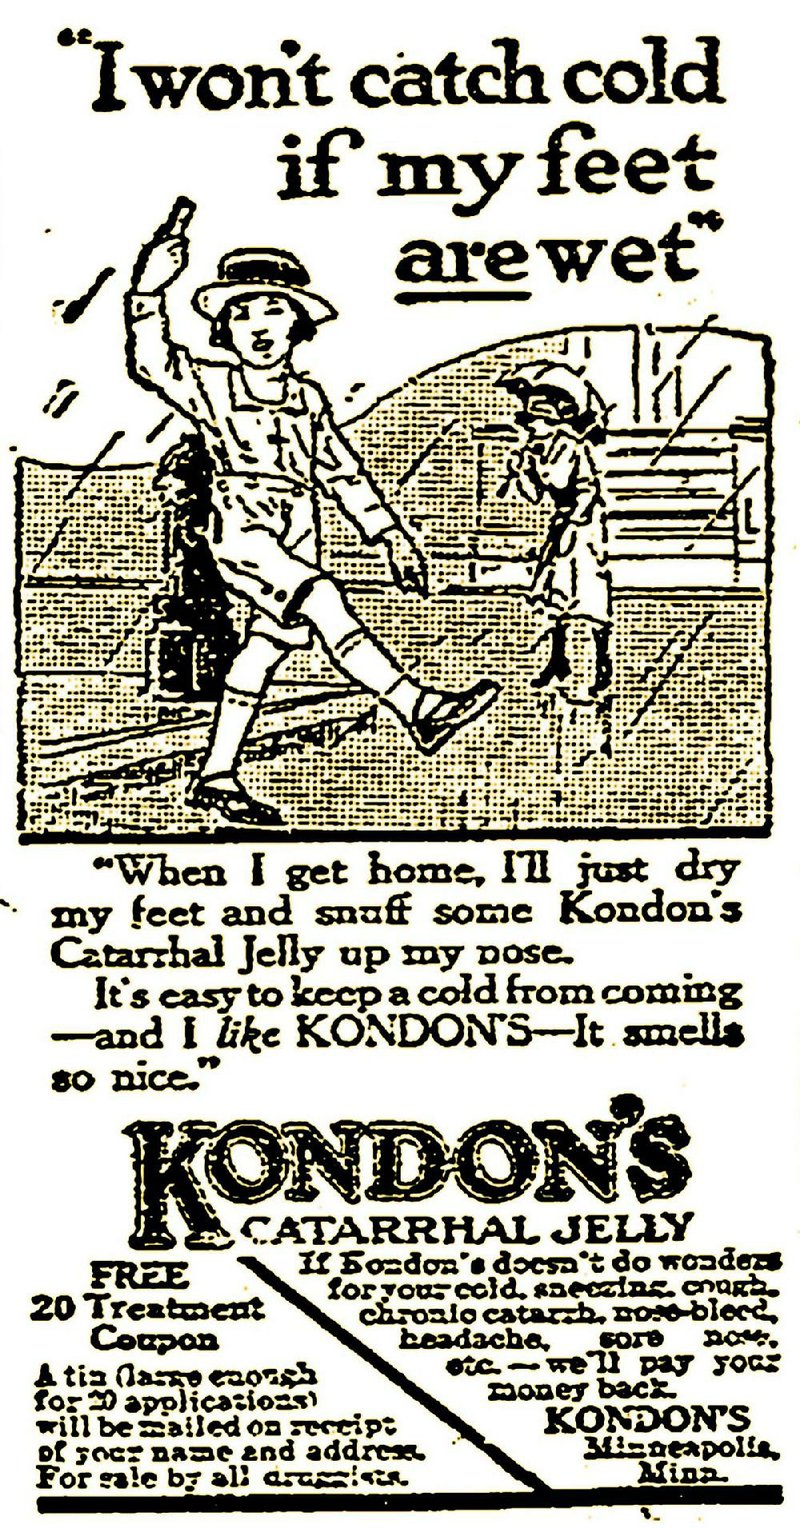 During the flu pandemic of October 1918, newspaper ads like this claimed that snuffing petroleum jelly up the nose would prevent disease. 